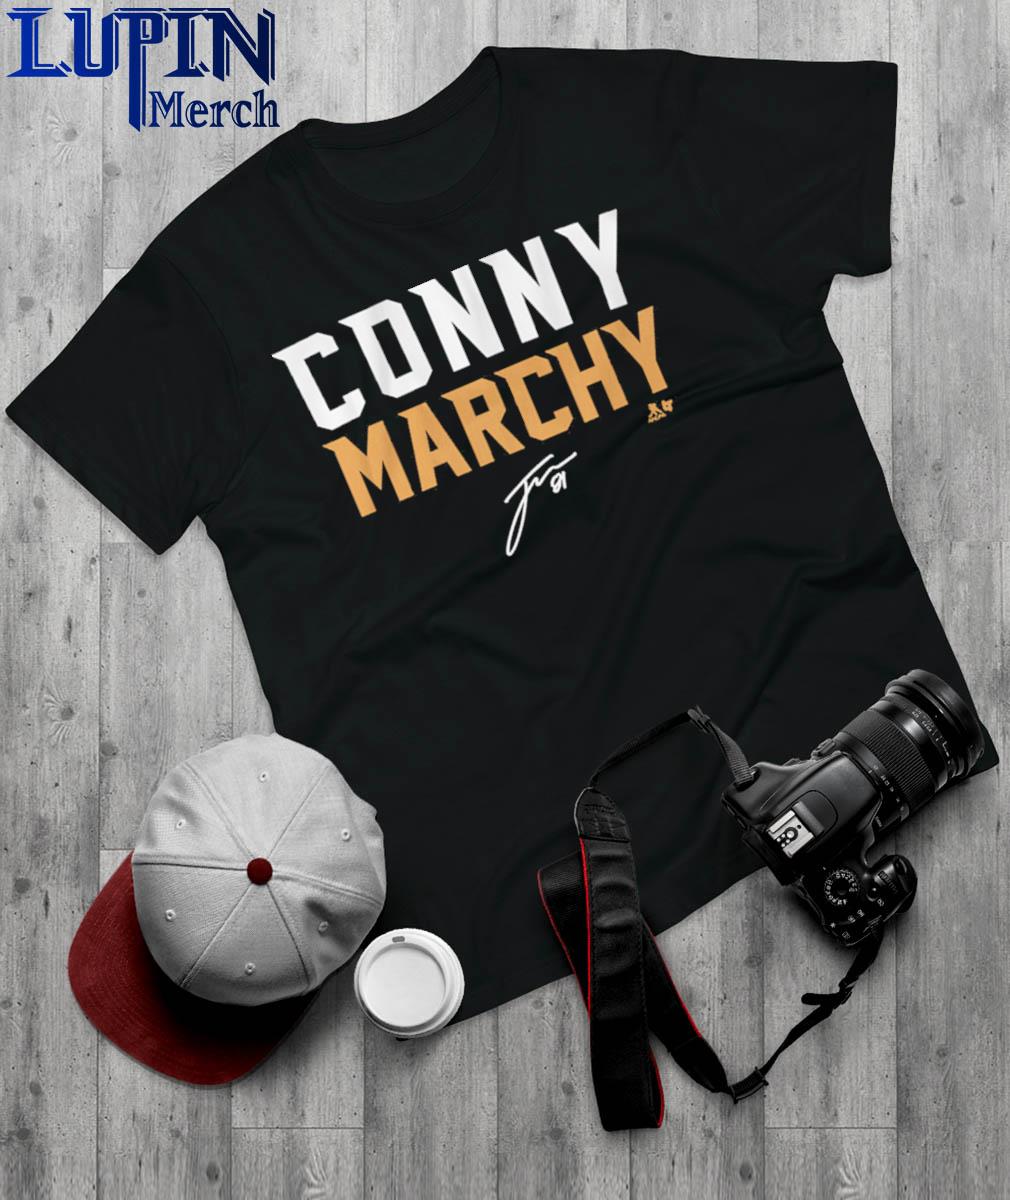 Jonathan Marchessault Vegas Golden Knights Conny Marchy t-shirt by